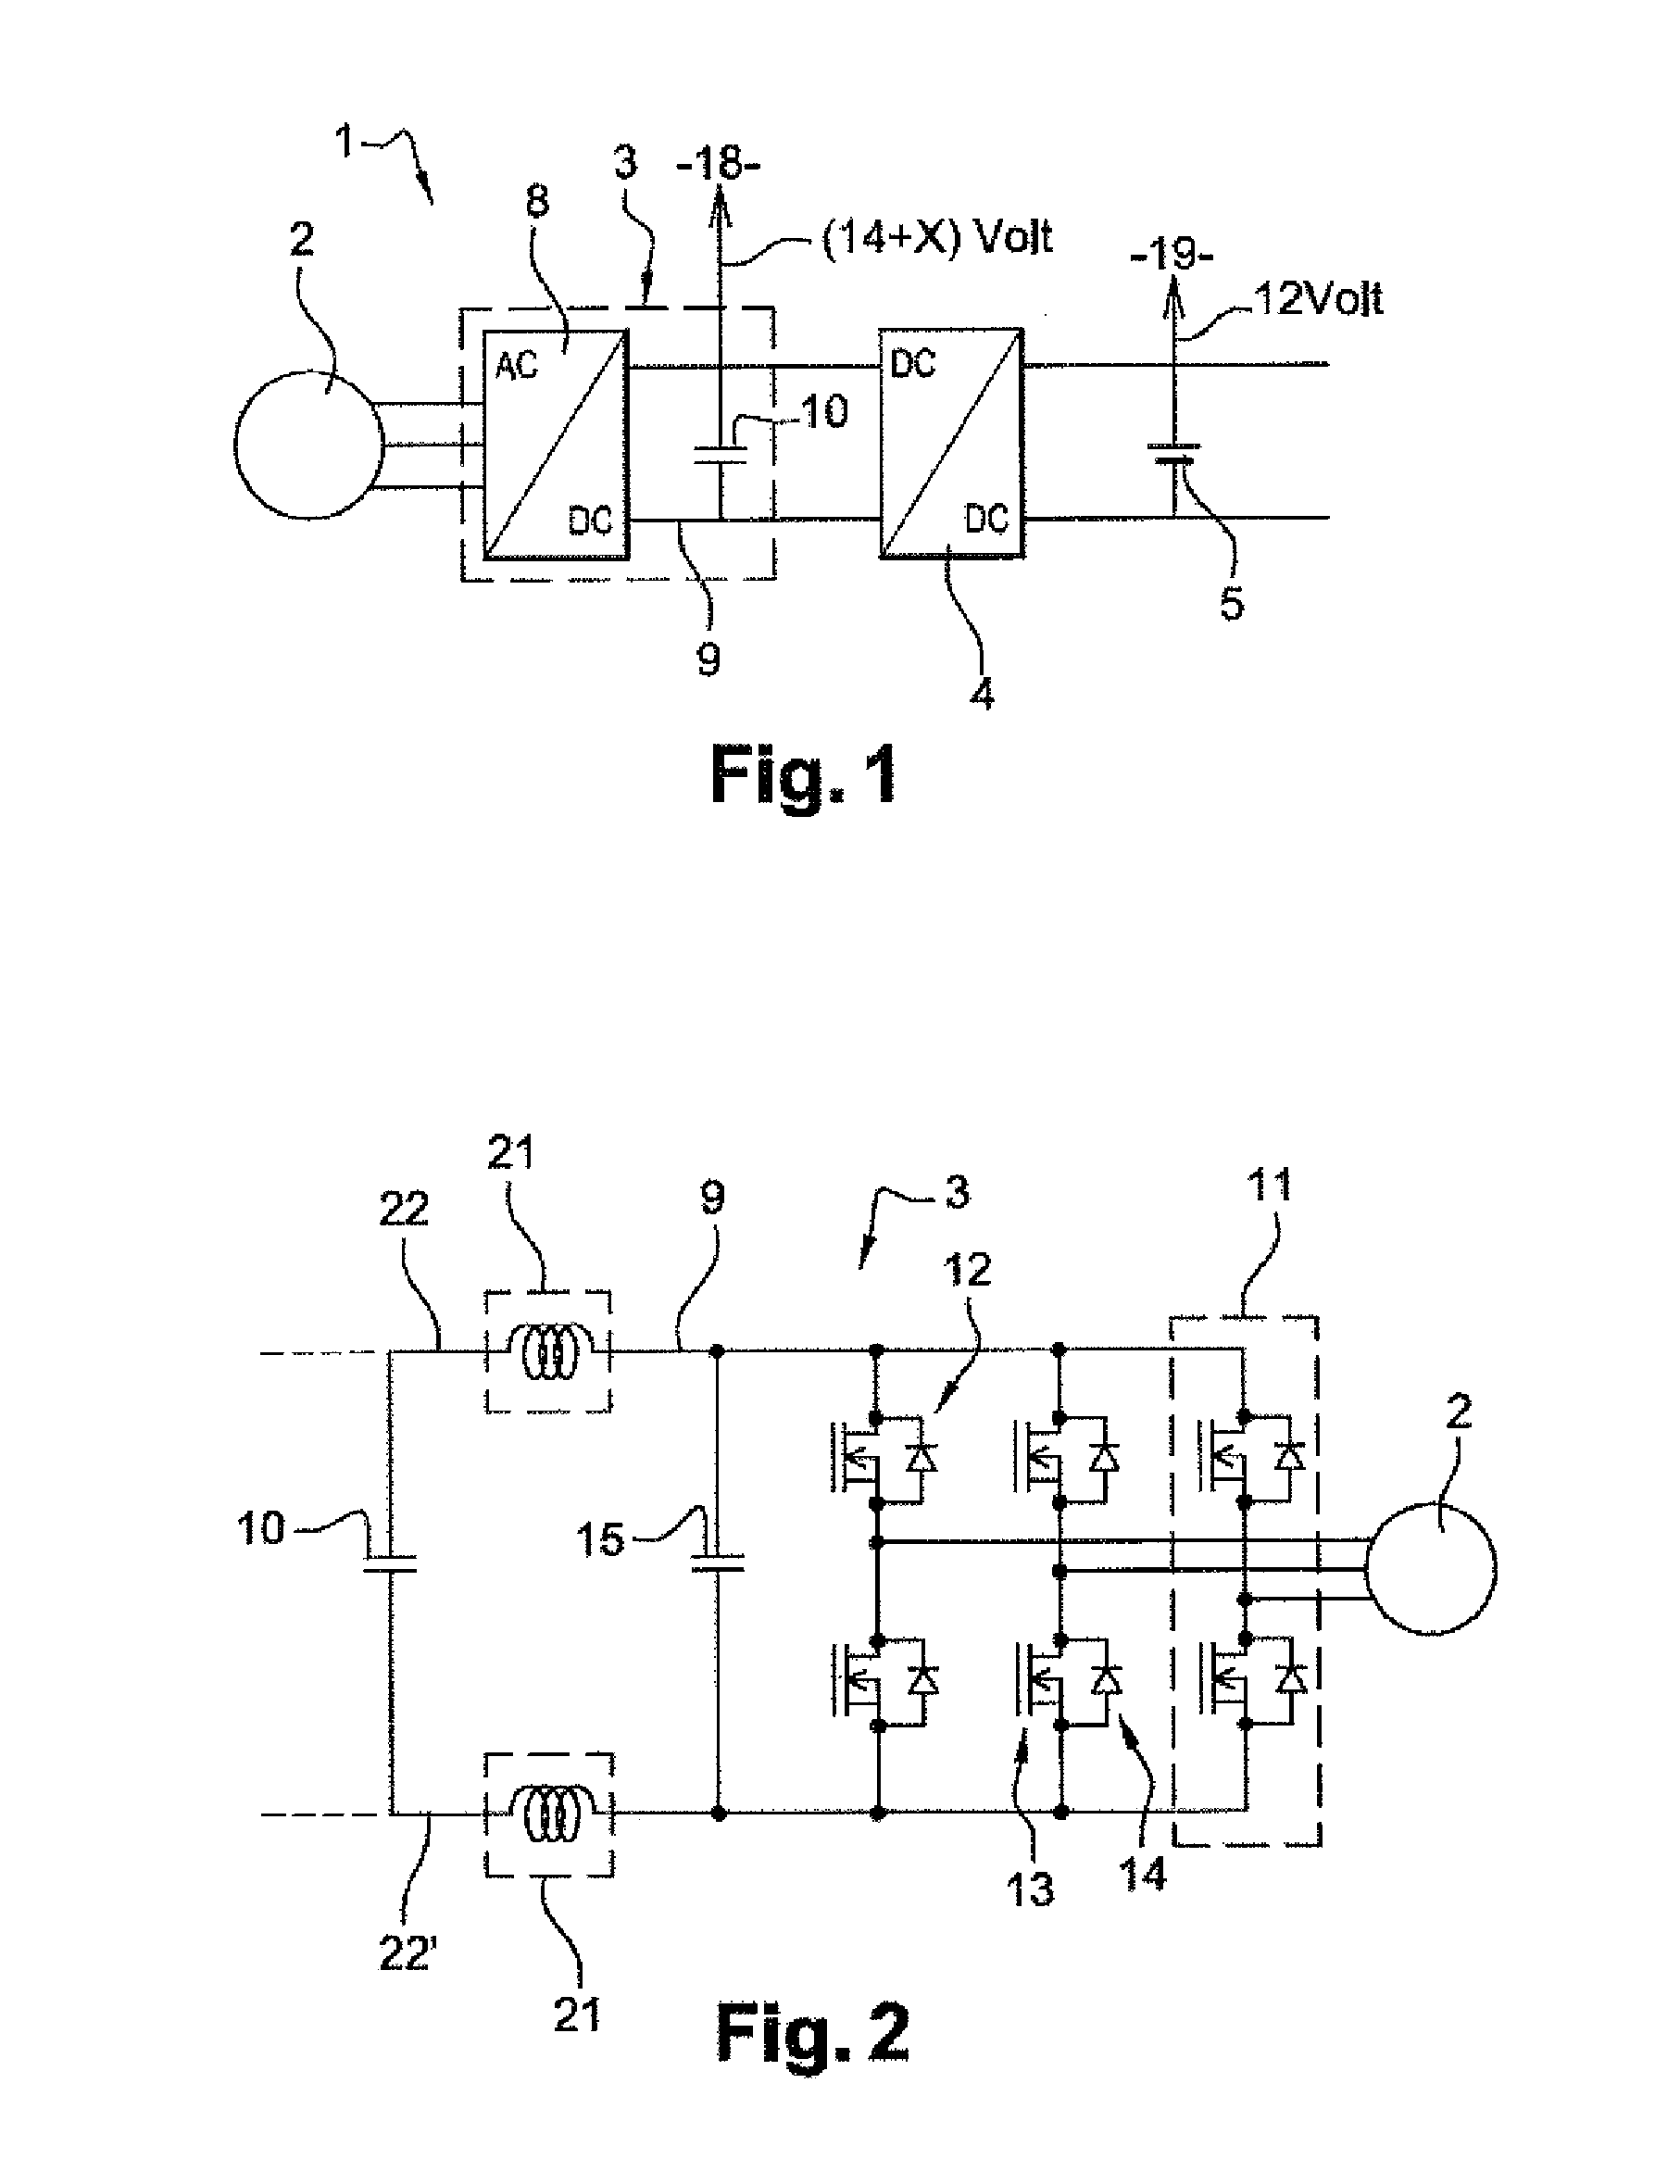 Power subassembly for micro-hybrid system in an automobile